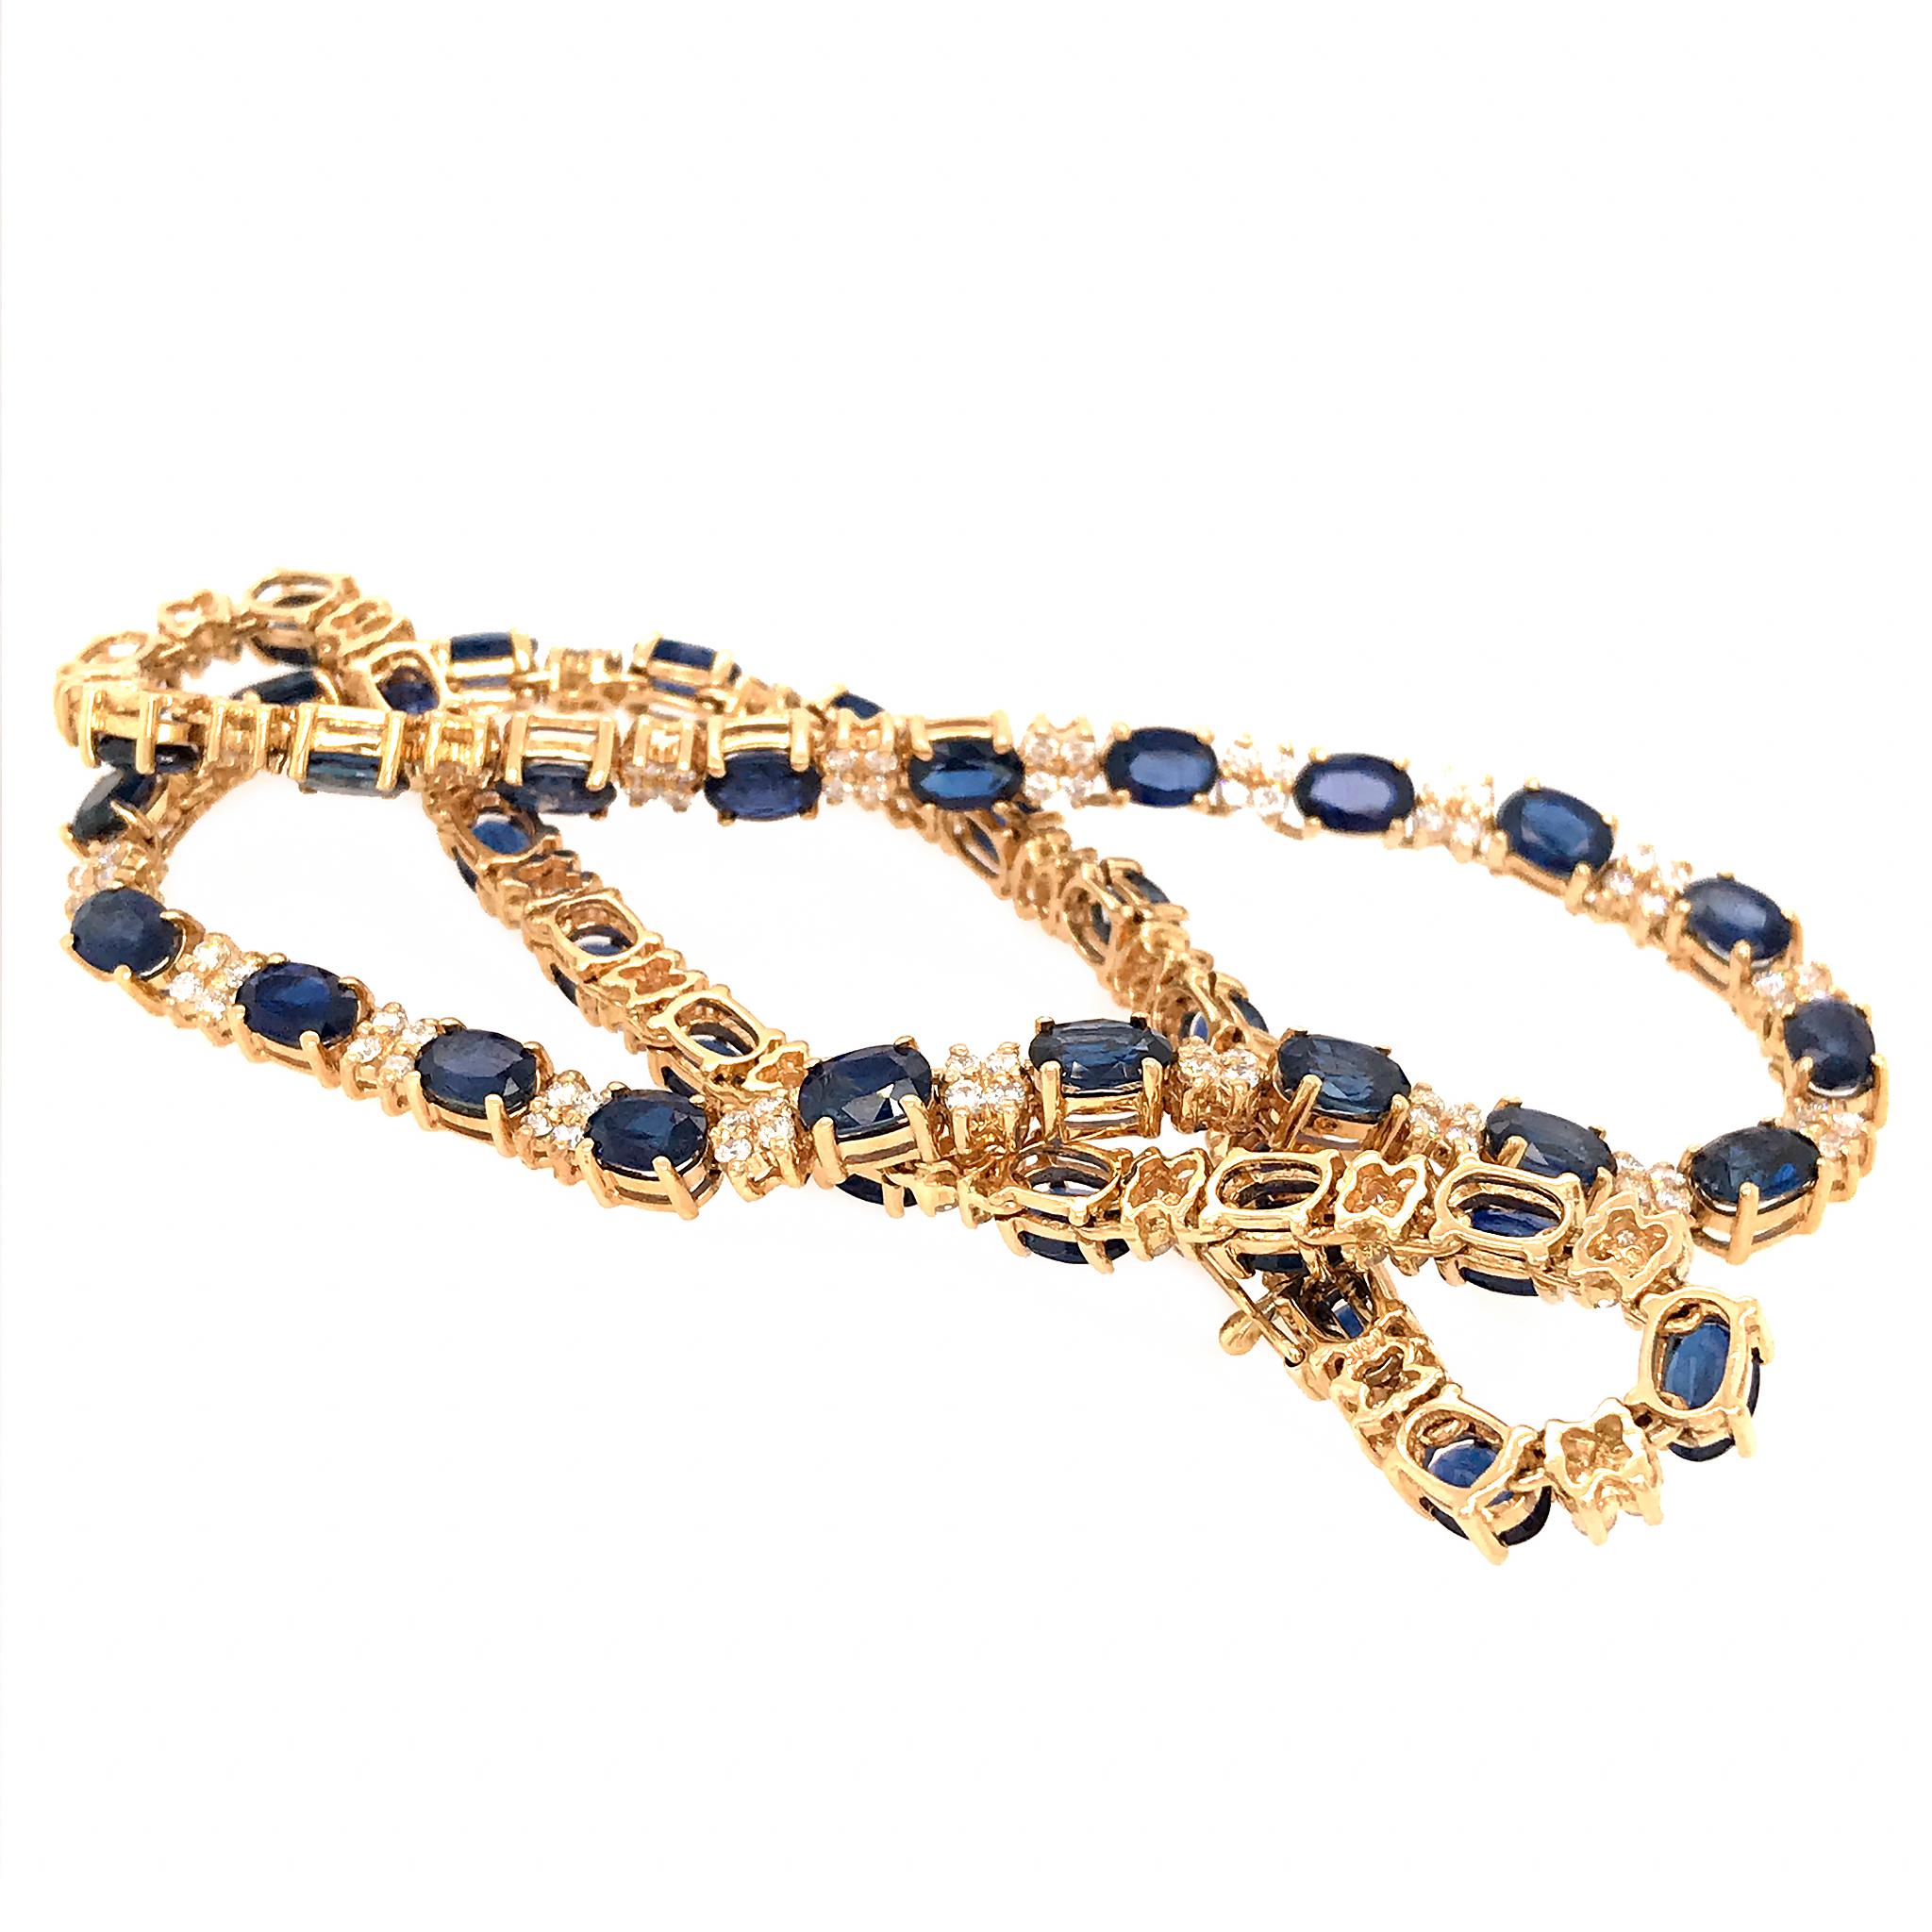 14K Yellow Gold
Sapphire: 24.55 ct twd
Length: 16 inches